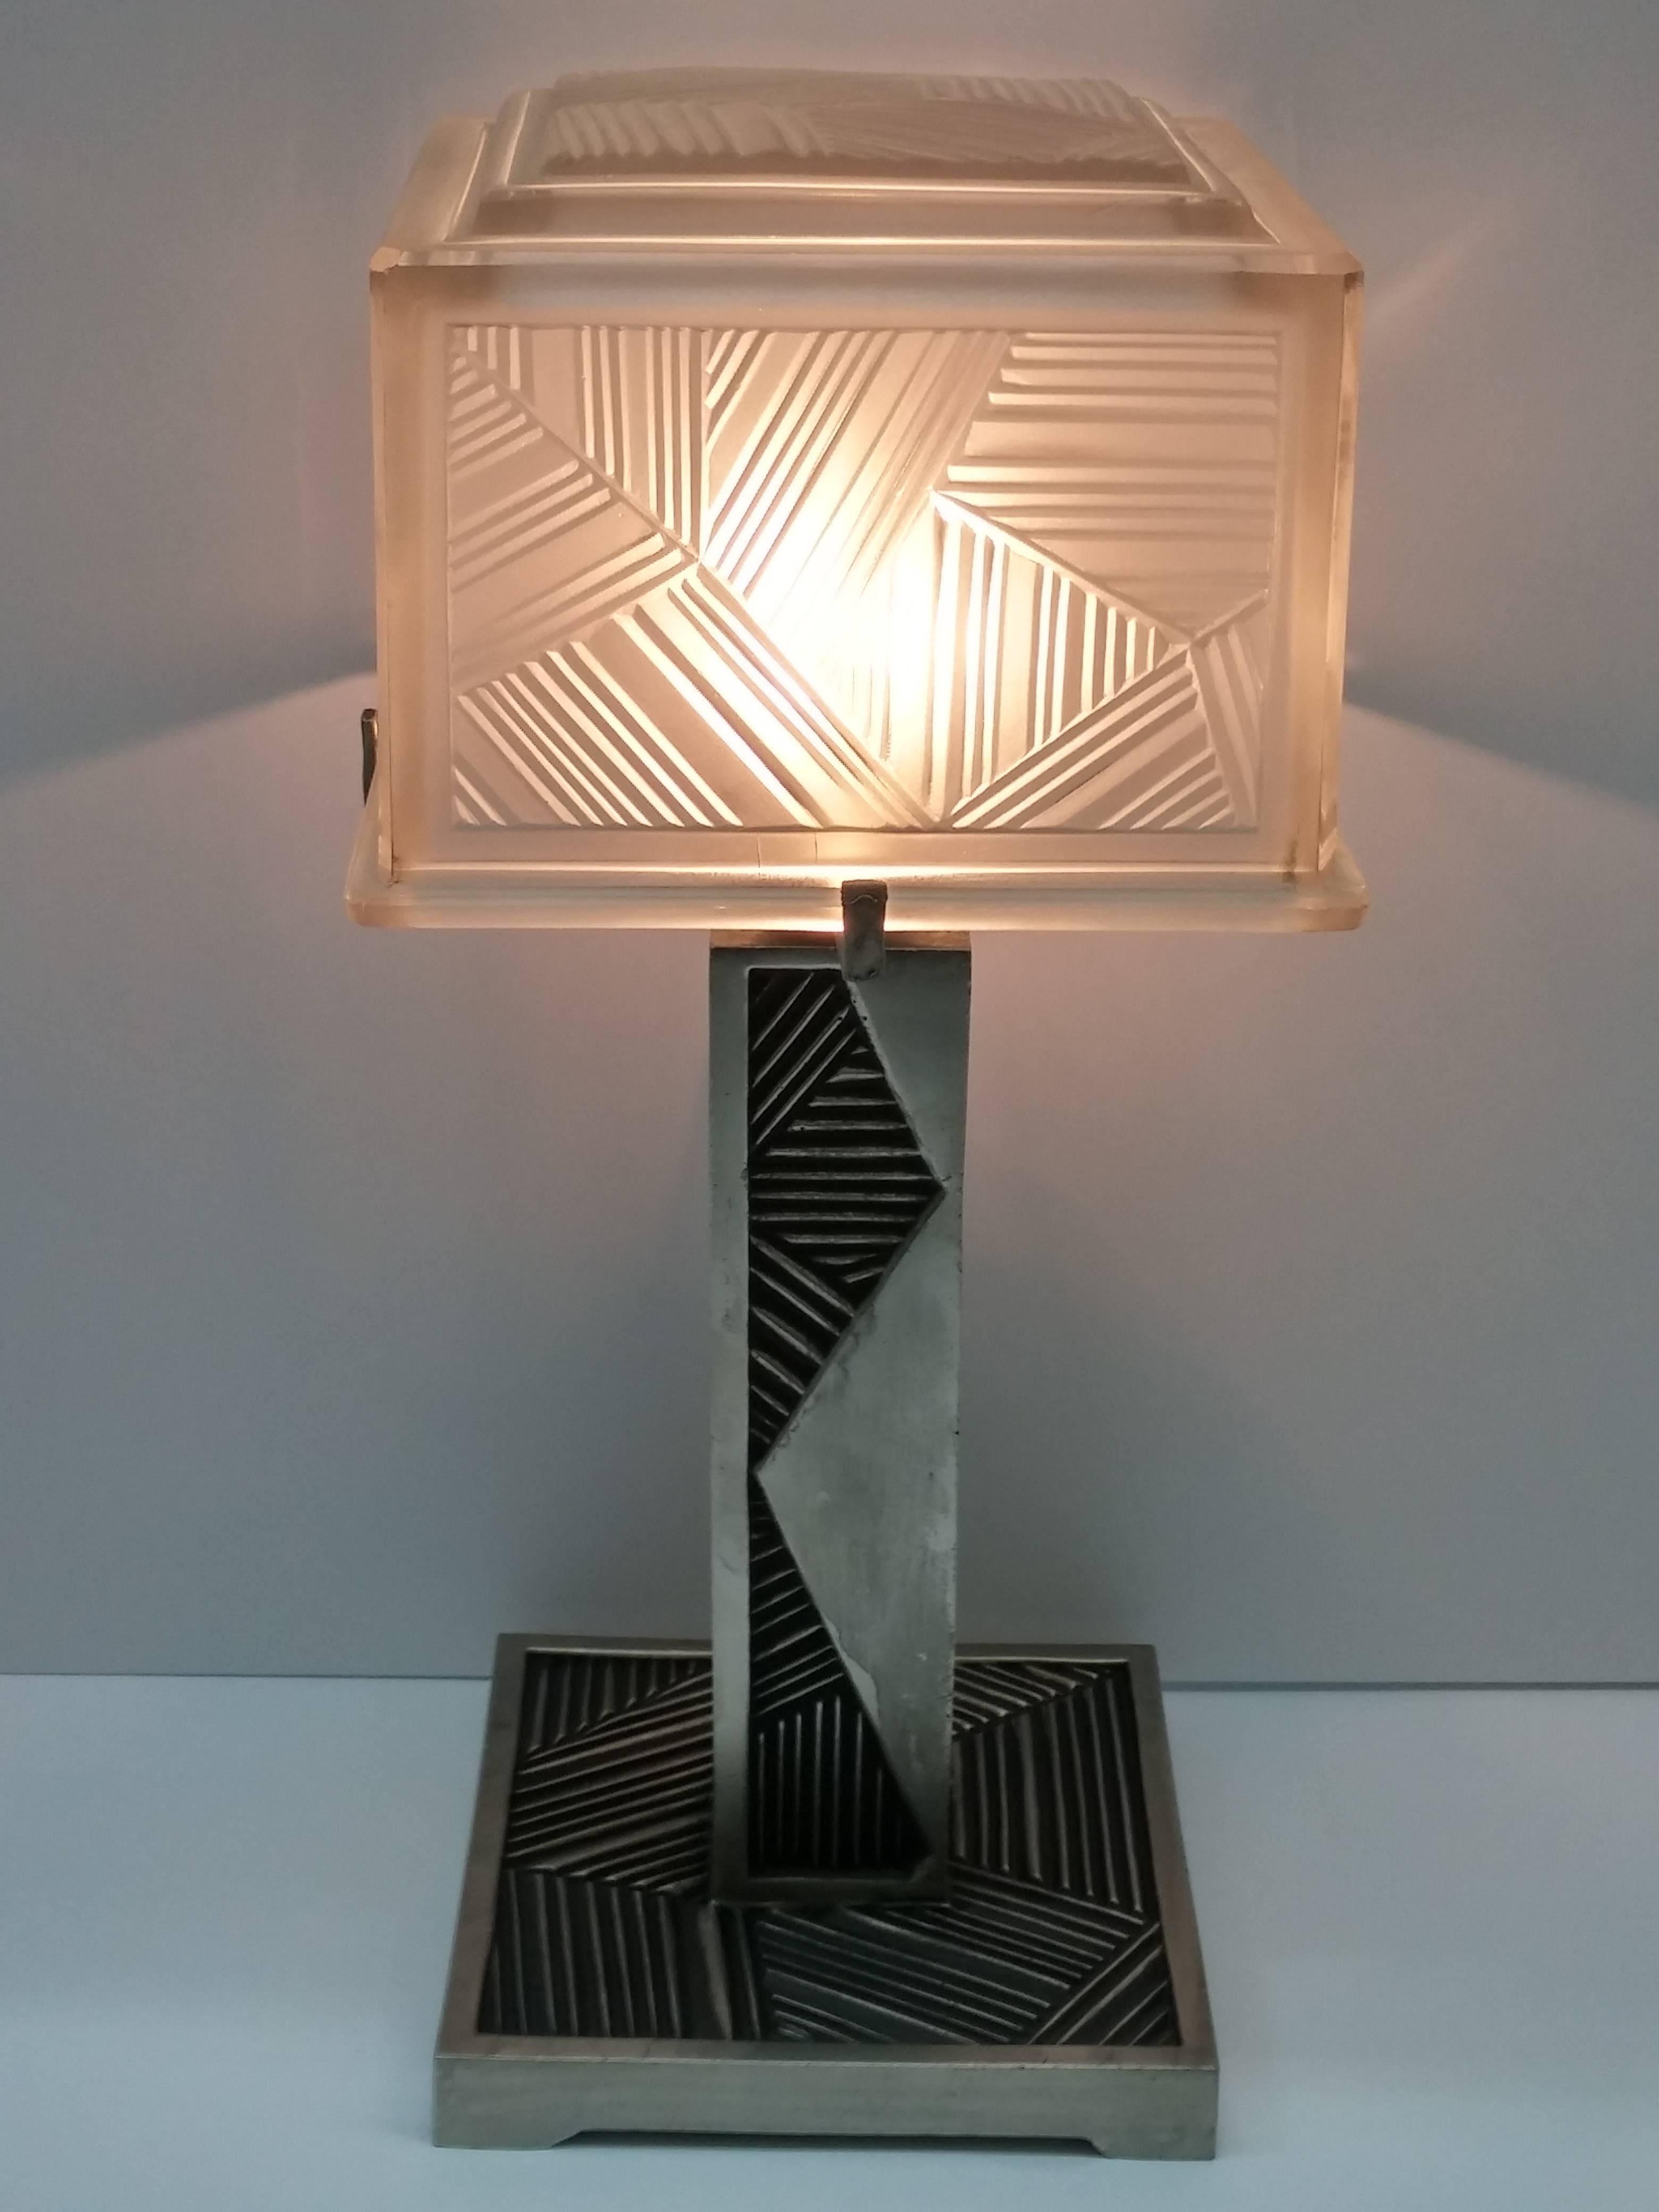 
A stunning French Art Deco square shaped table lamp created in the 1930s by 